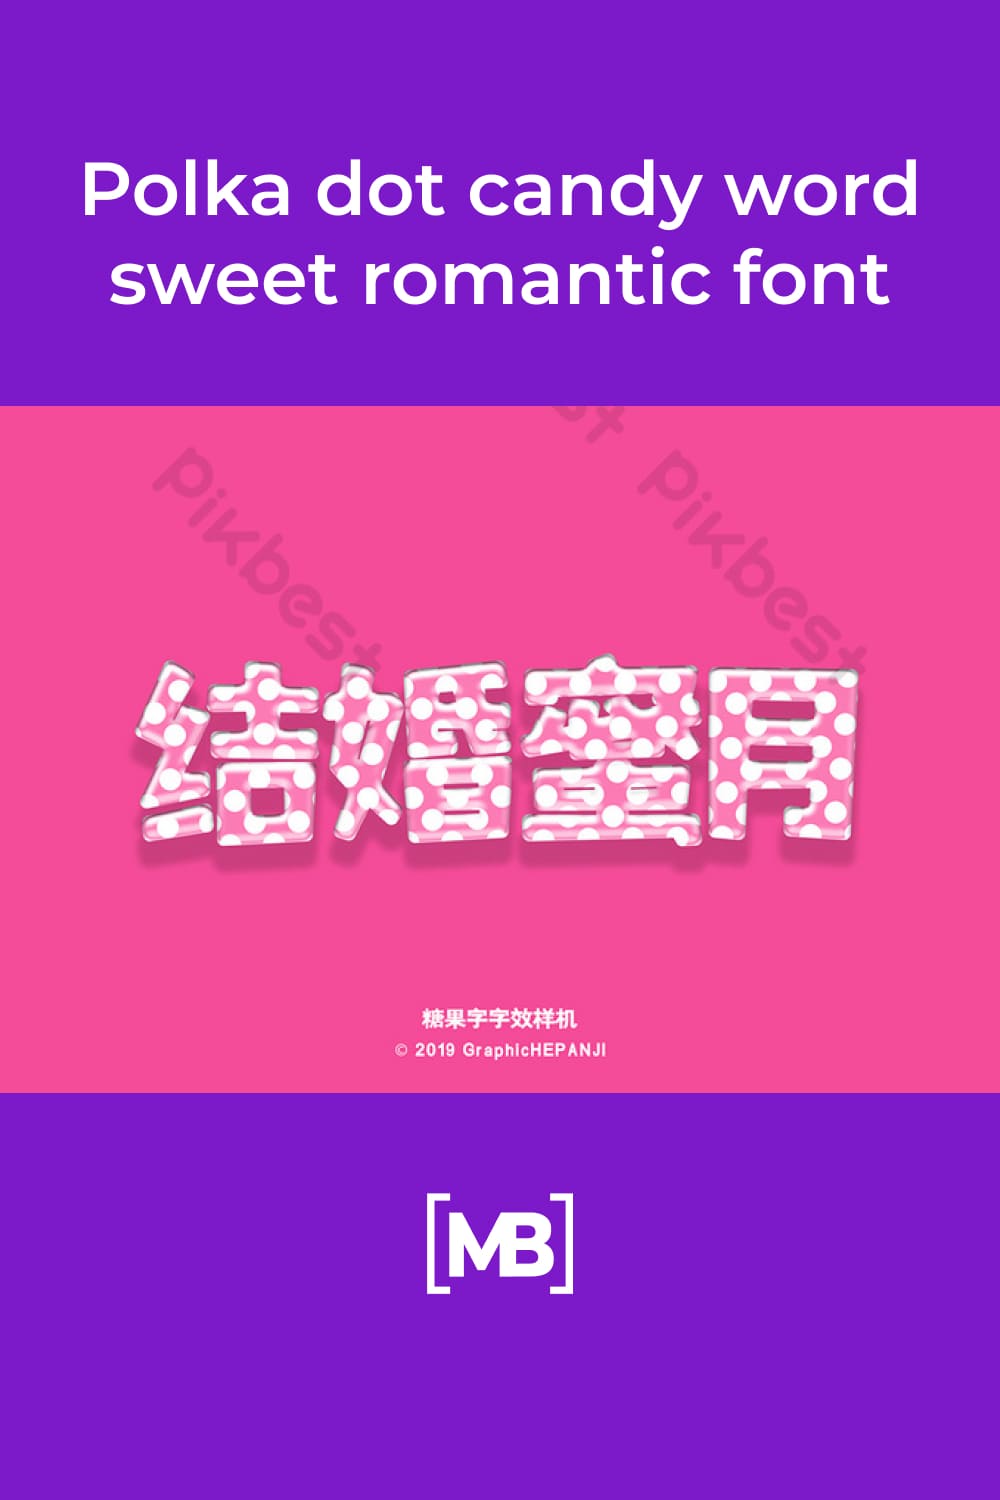 Polka dot candy word sweet romantic font typeface.